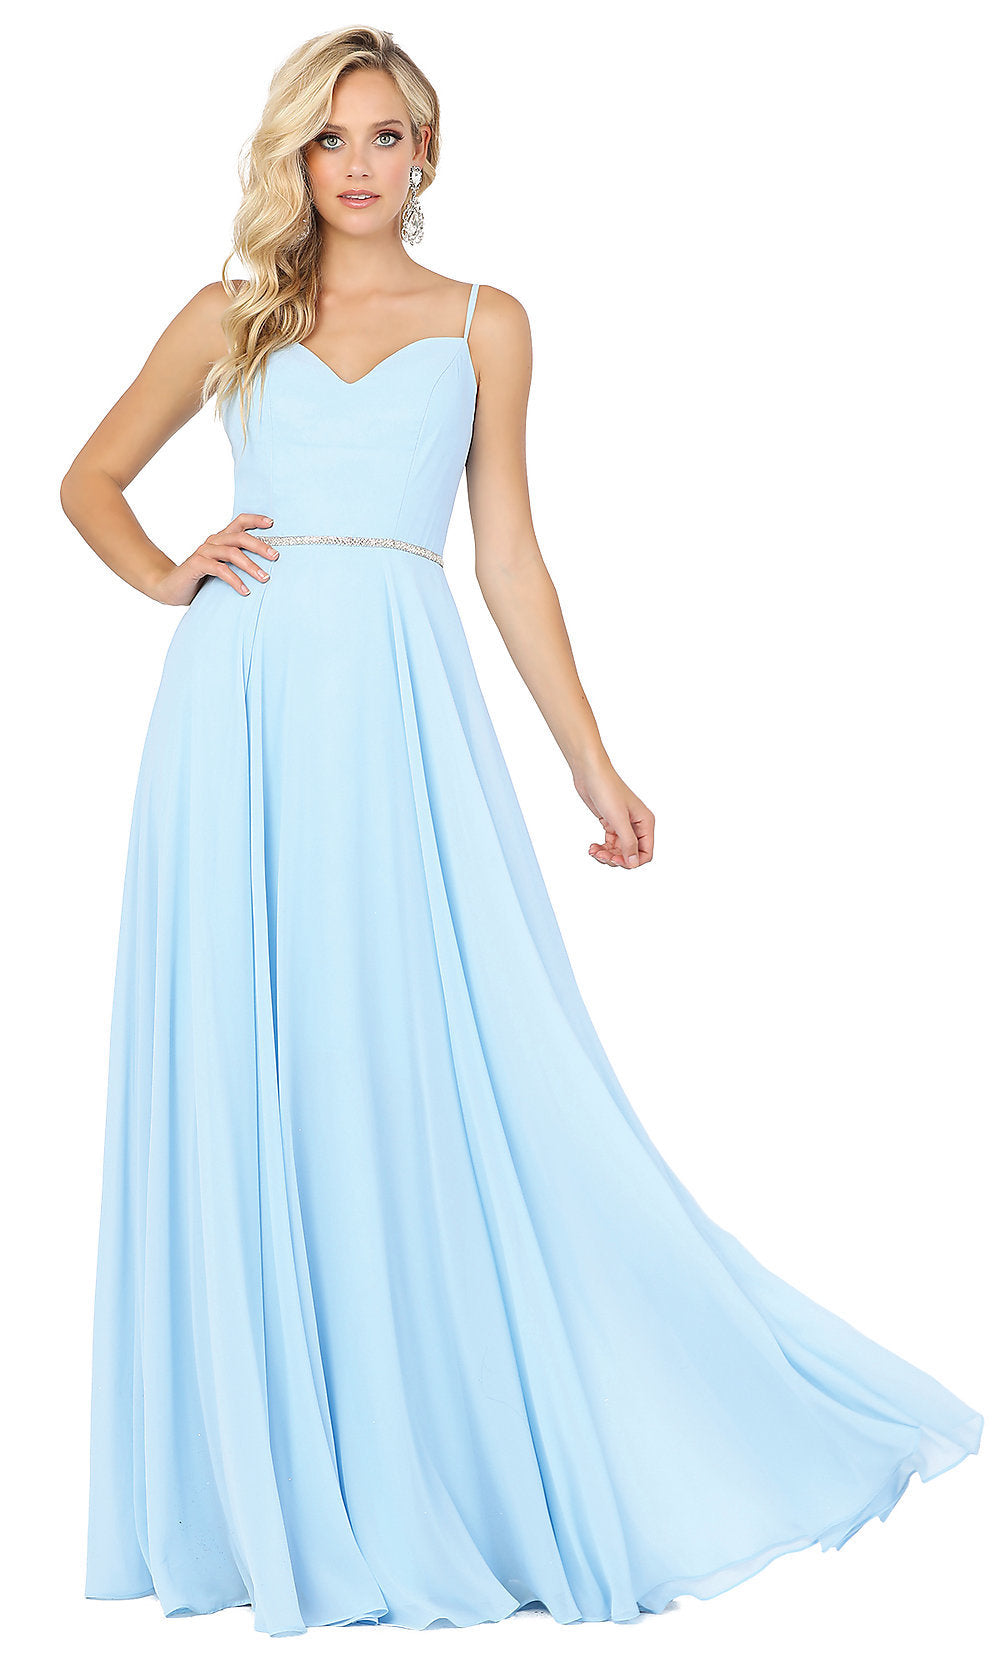 Simple Long A-Line Prom Dress with Corset Back